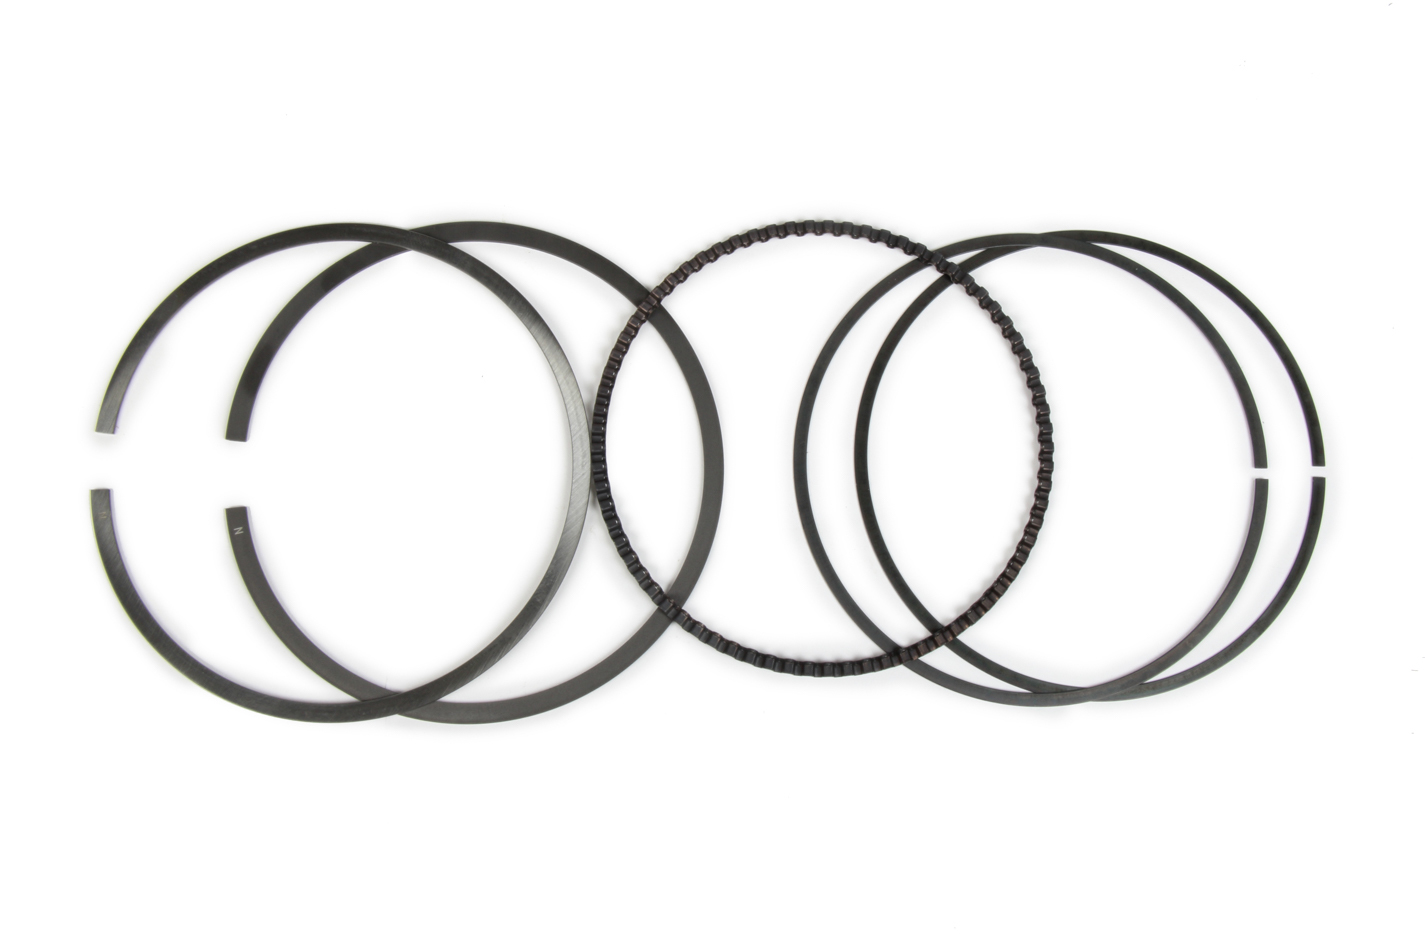 Wiseco Pistons 8700XX Piston Rings, Premium, 3.425 in Bore, Drop in, 1.0 x 1.2 x 2.8 mm Thick, Standard Tension, Steel, Gas Nitride, Single Cylinder, Each